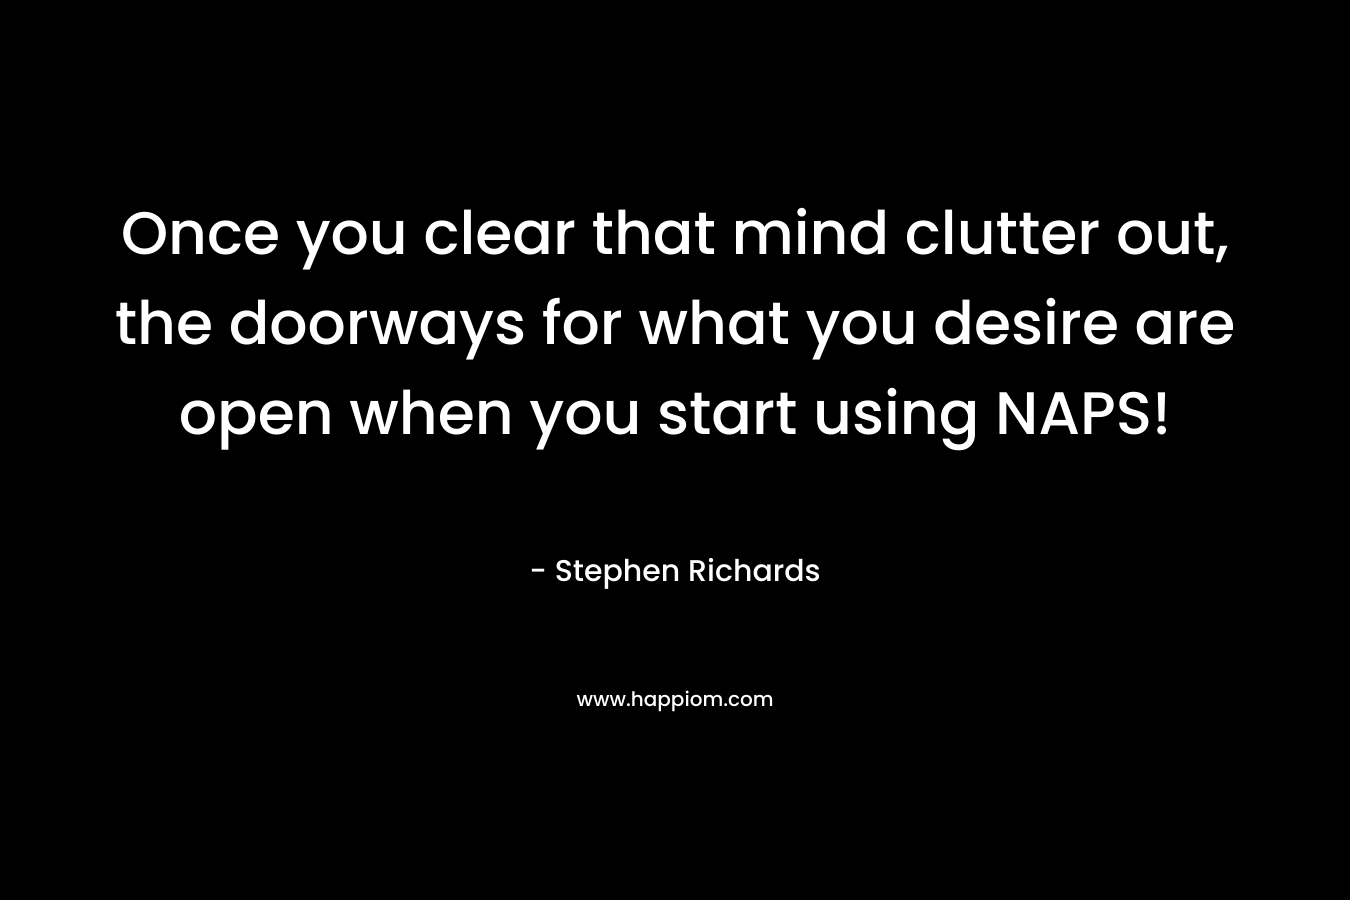 Once you clear that mind clutter out, the doorways for what you desire are open when you start using NAPS!